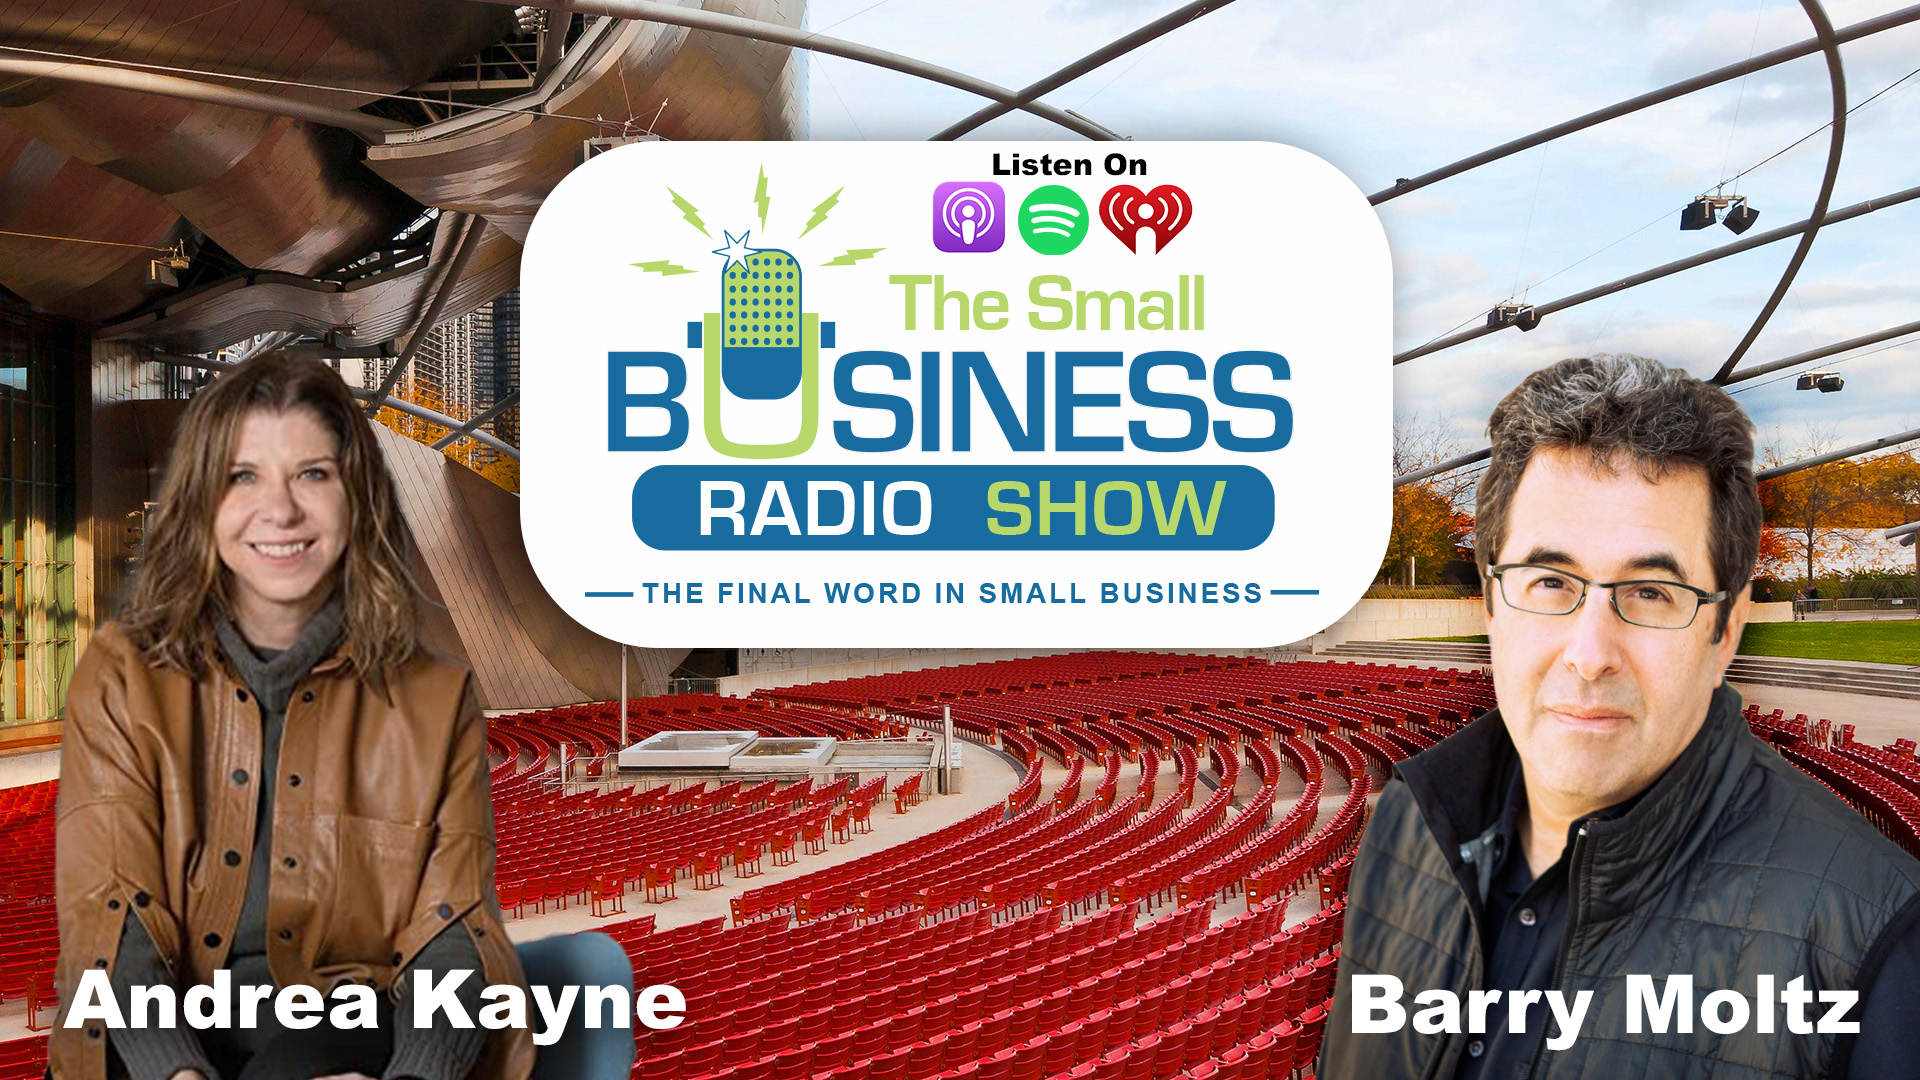 Andrea Kayne on The Small Business Radio Show